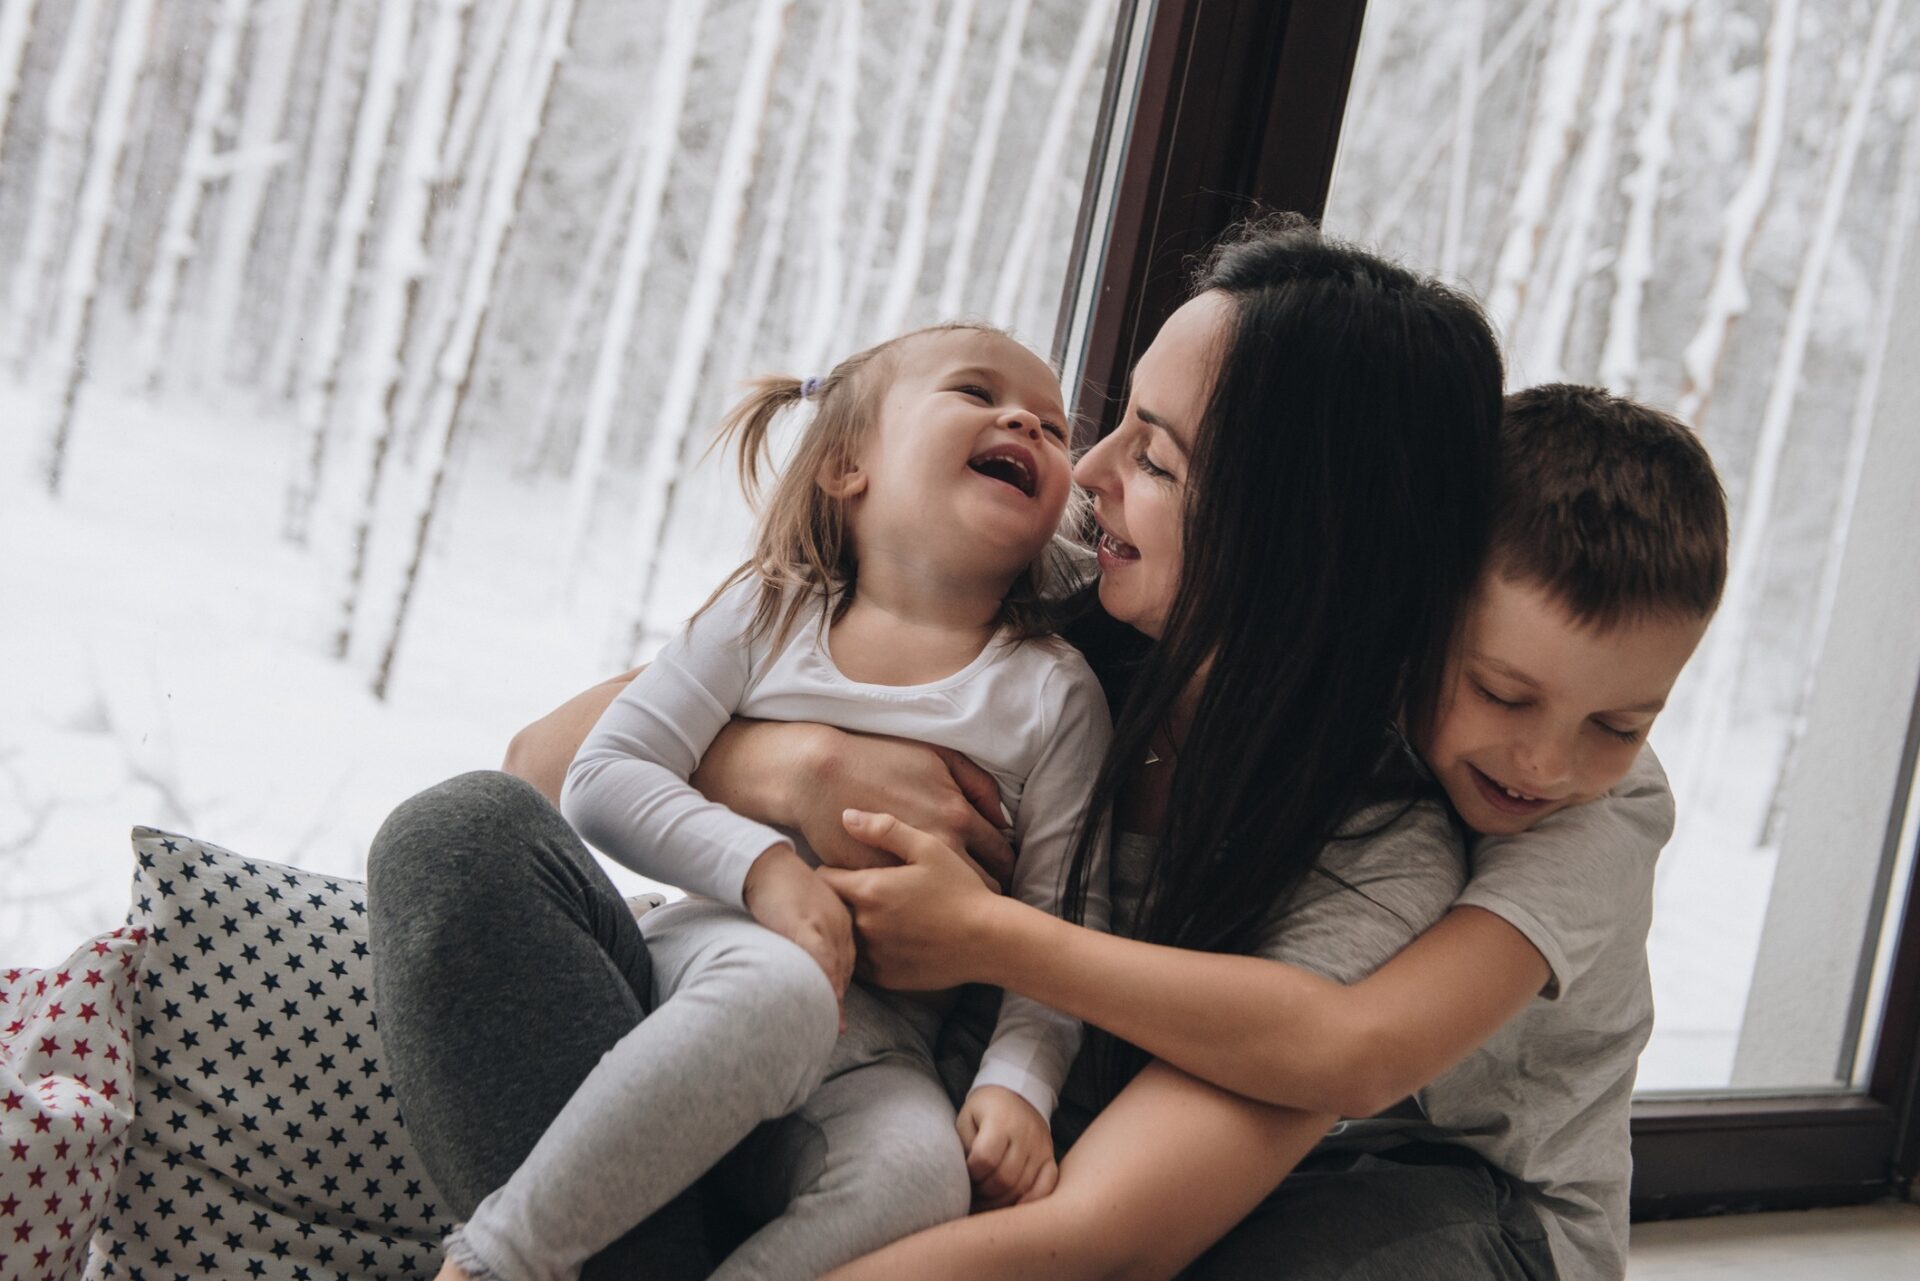 A person is sitting by a window, laughing and embracing two children. They appear happy and playful against a snow-covered forest backdrop.